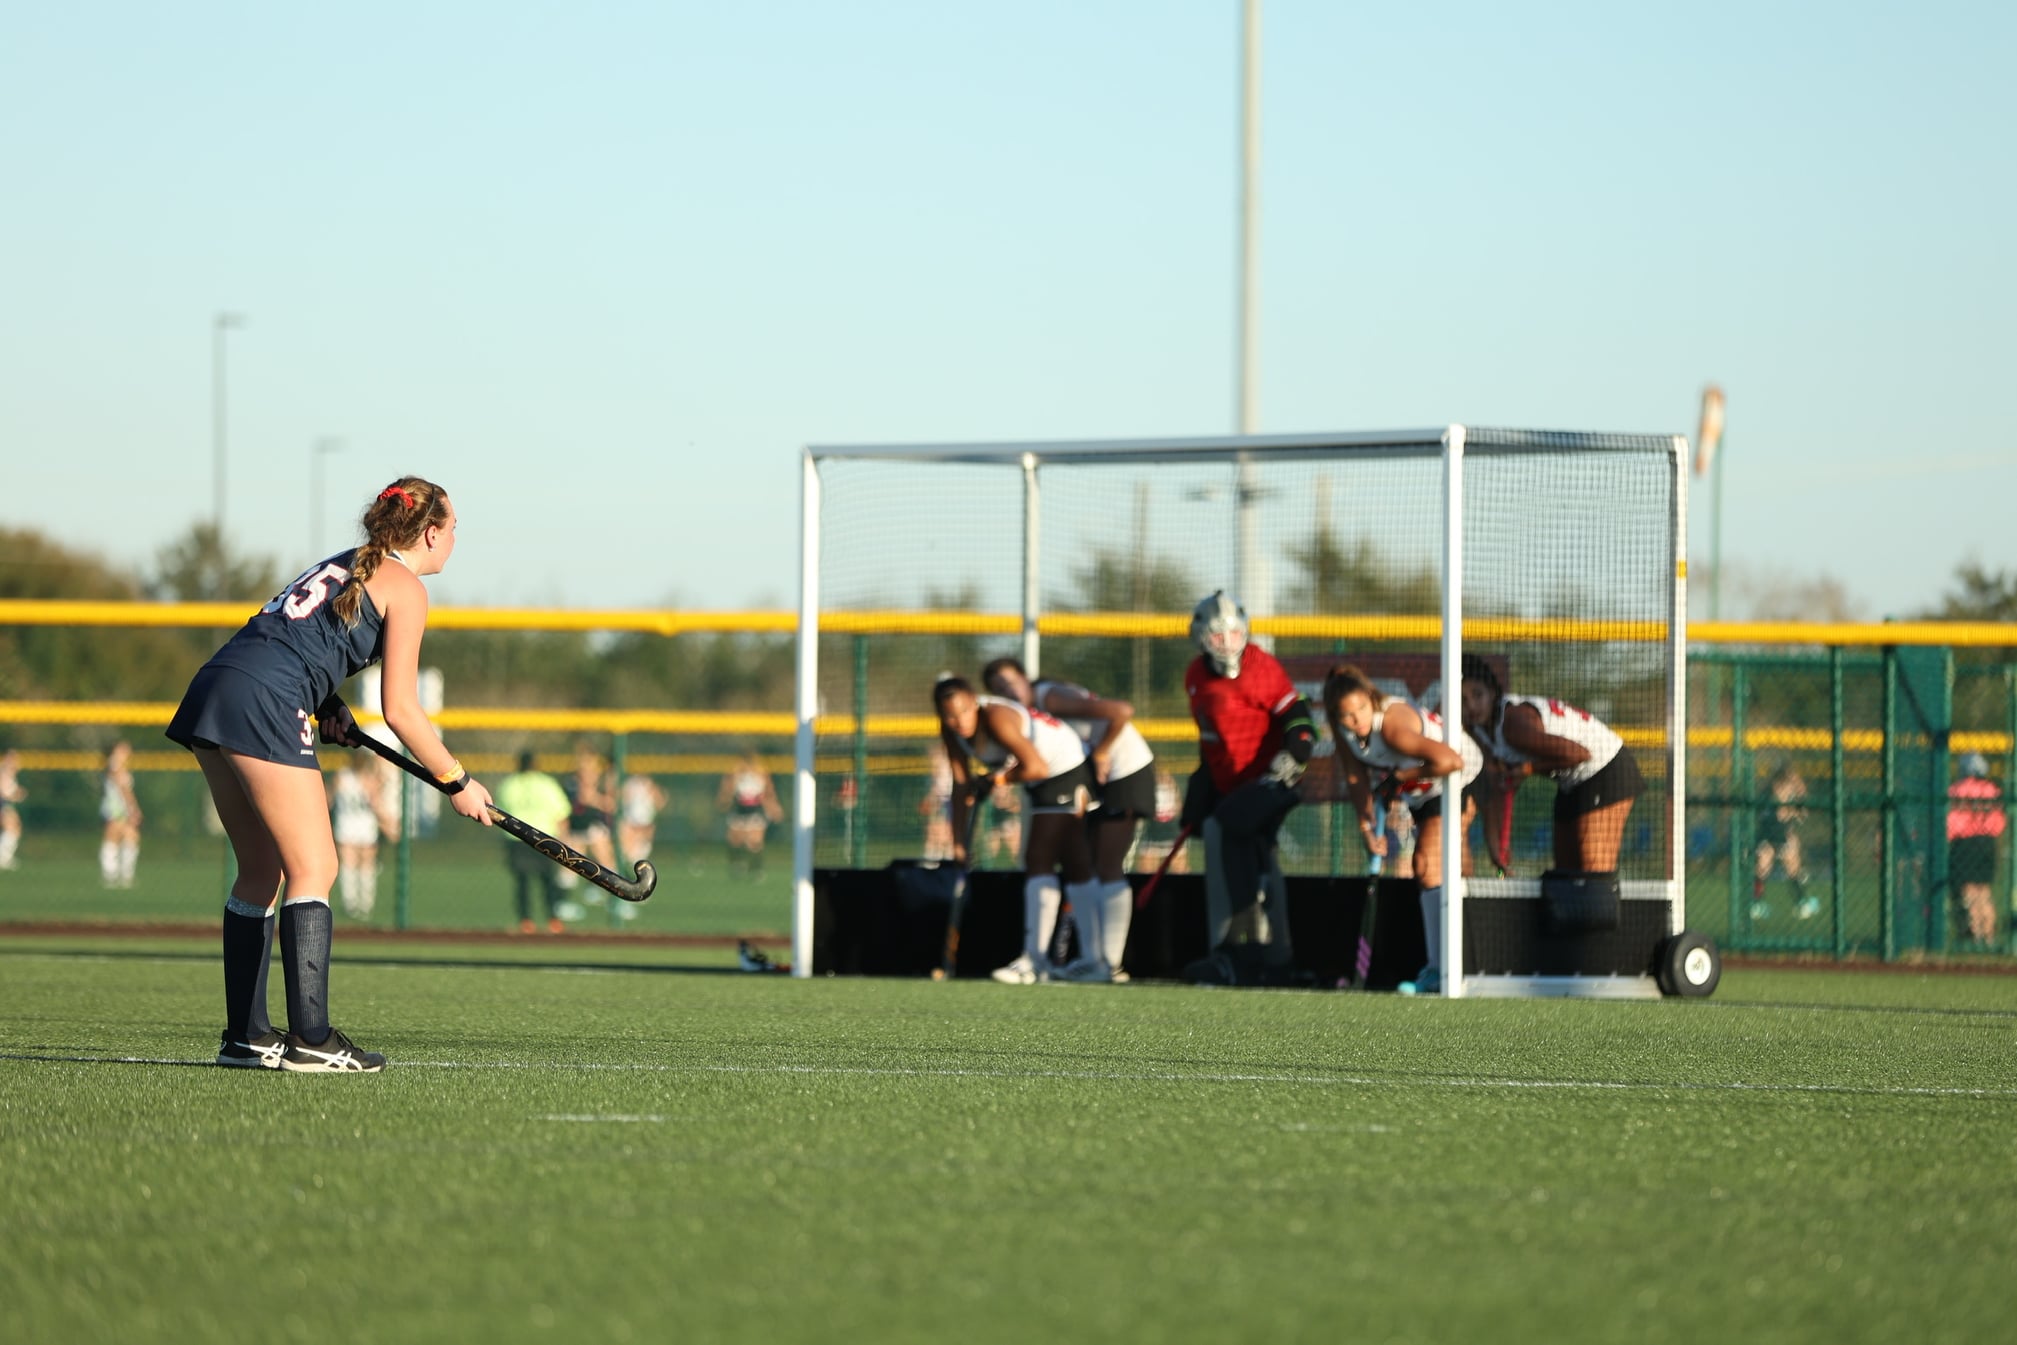 Field hockey players prepare to play out a penalty corner.